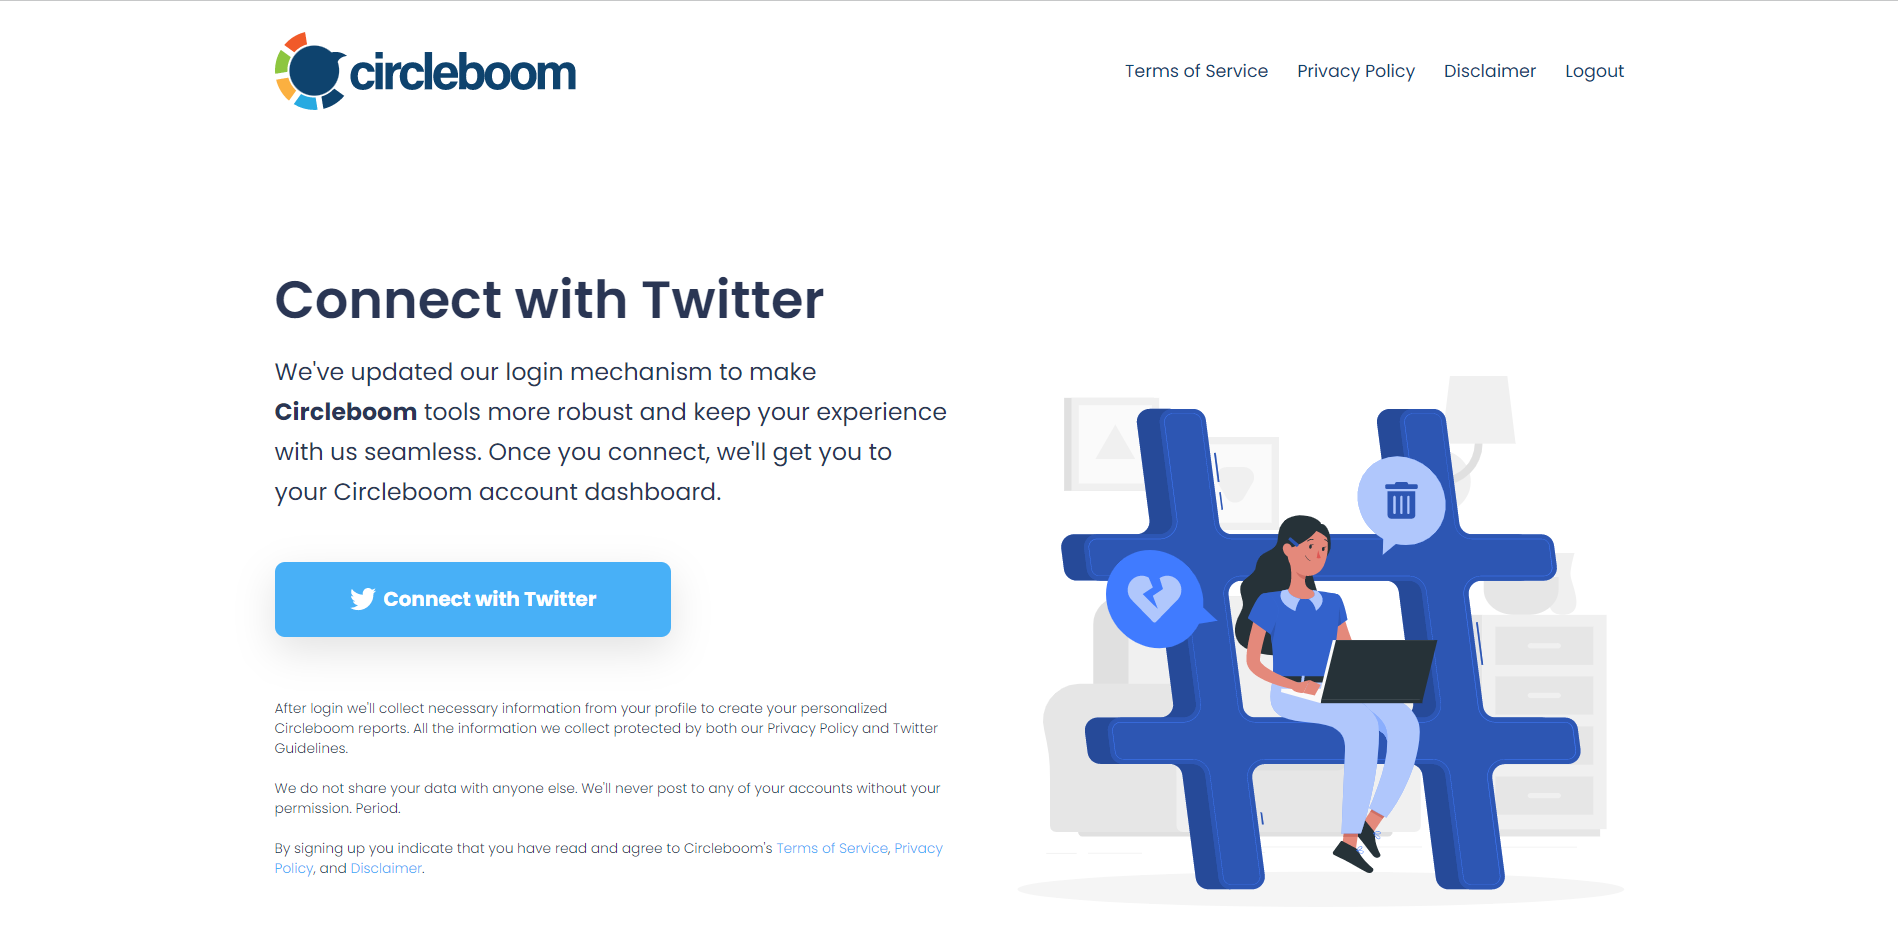 Delete all your Twitter likes after signed in to Circleboom Twitter dashboard!